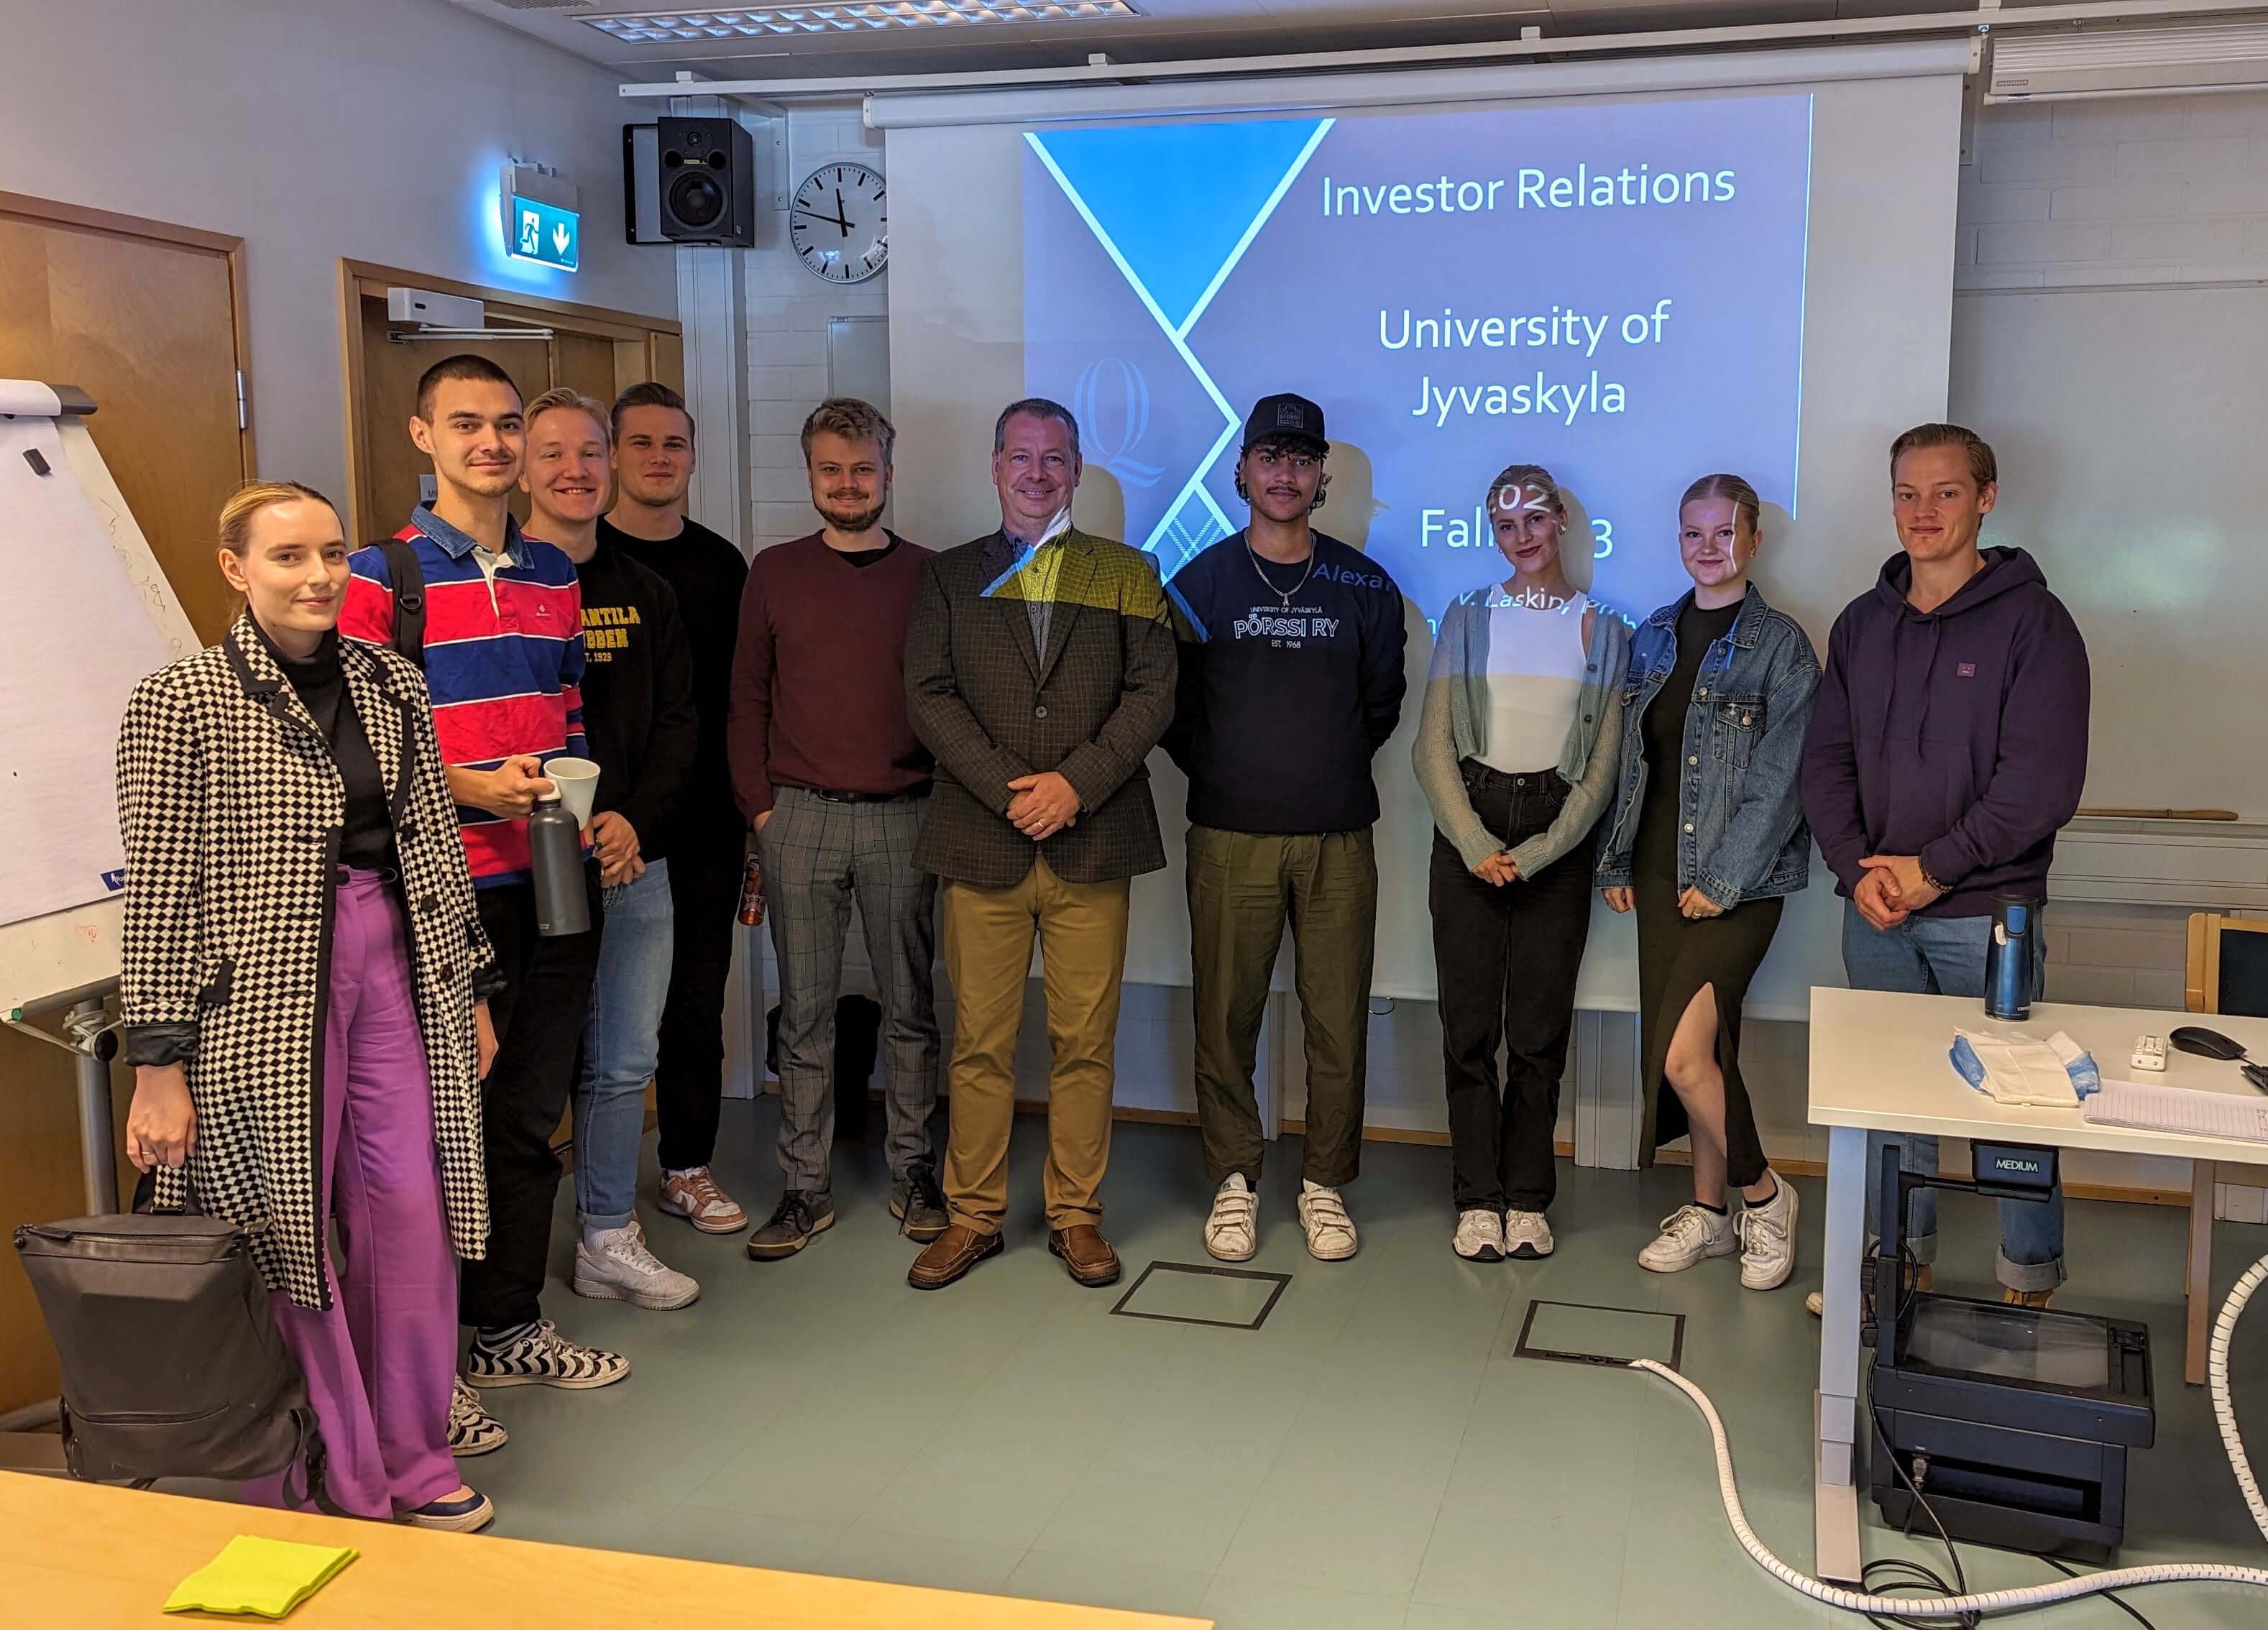 Professor Alexander Laskin teaches a group of students at a university in Finland.